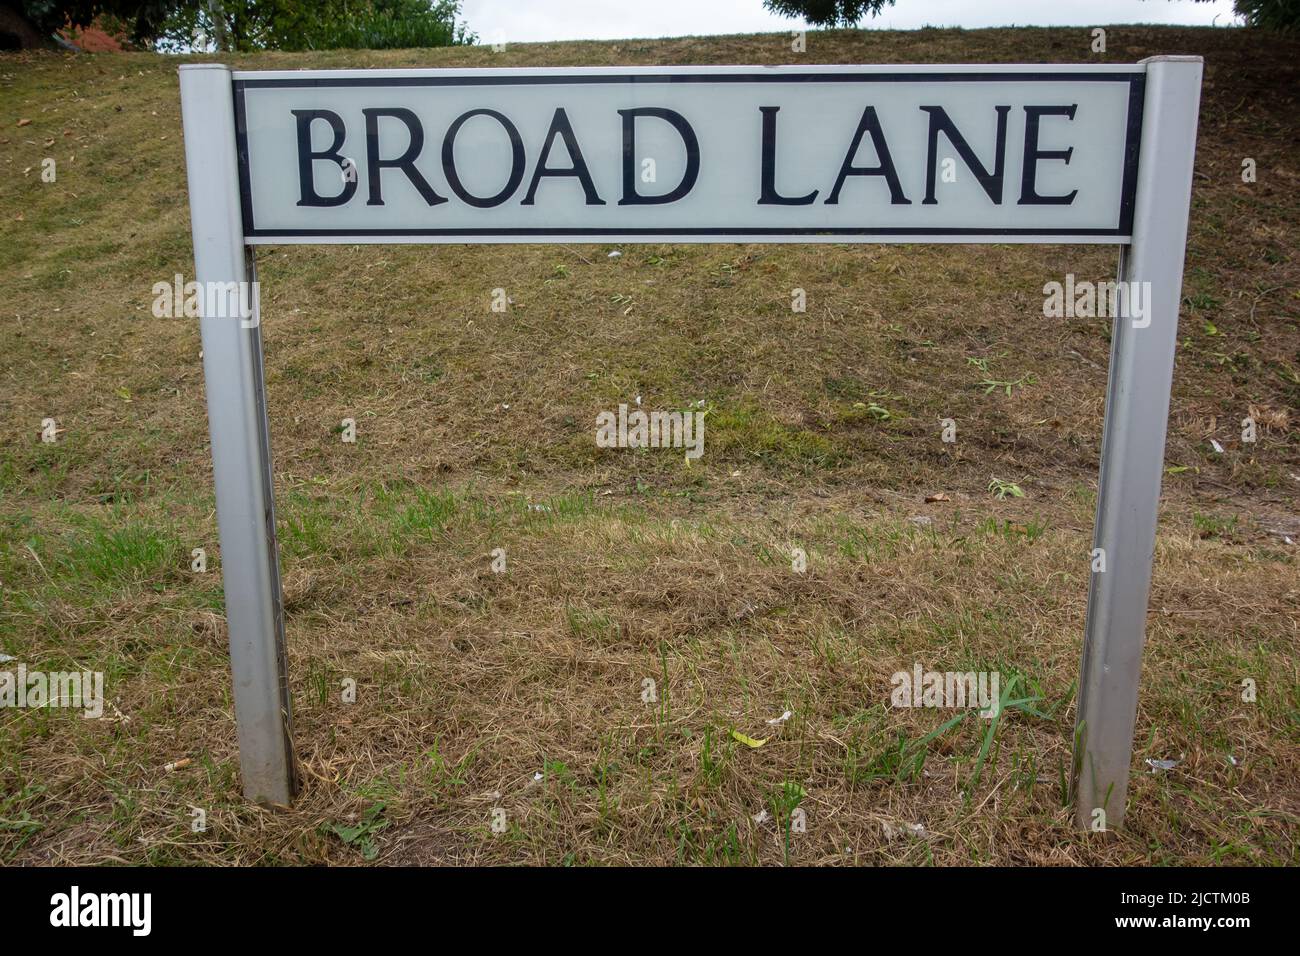 Broad lane street name sign on two posts with grass in the background Stock Photo